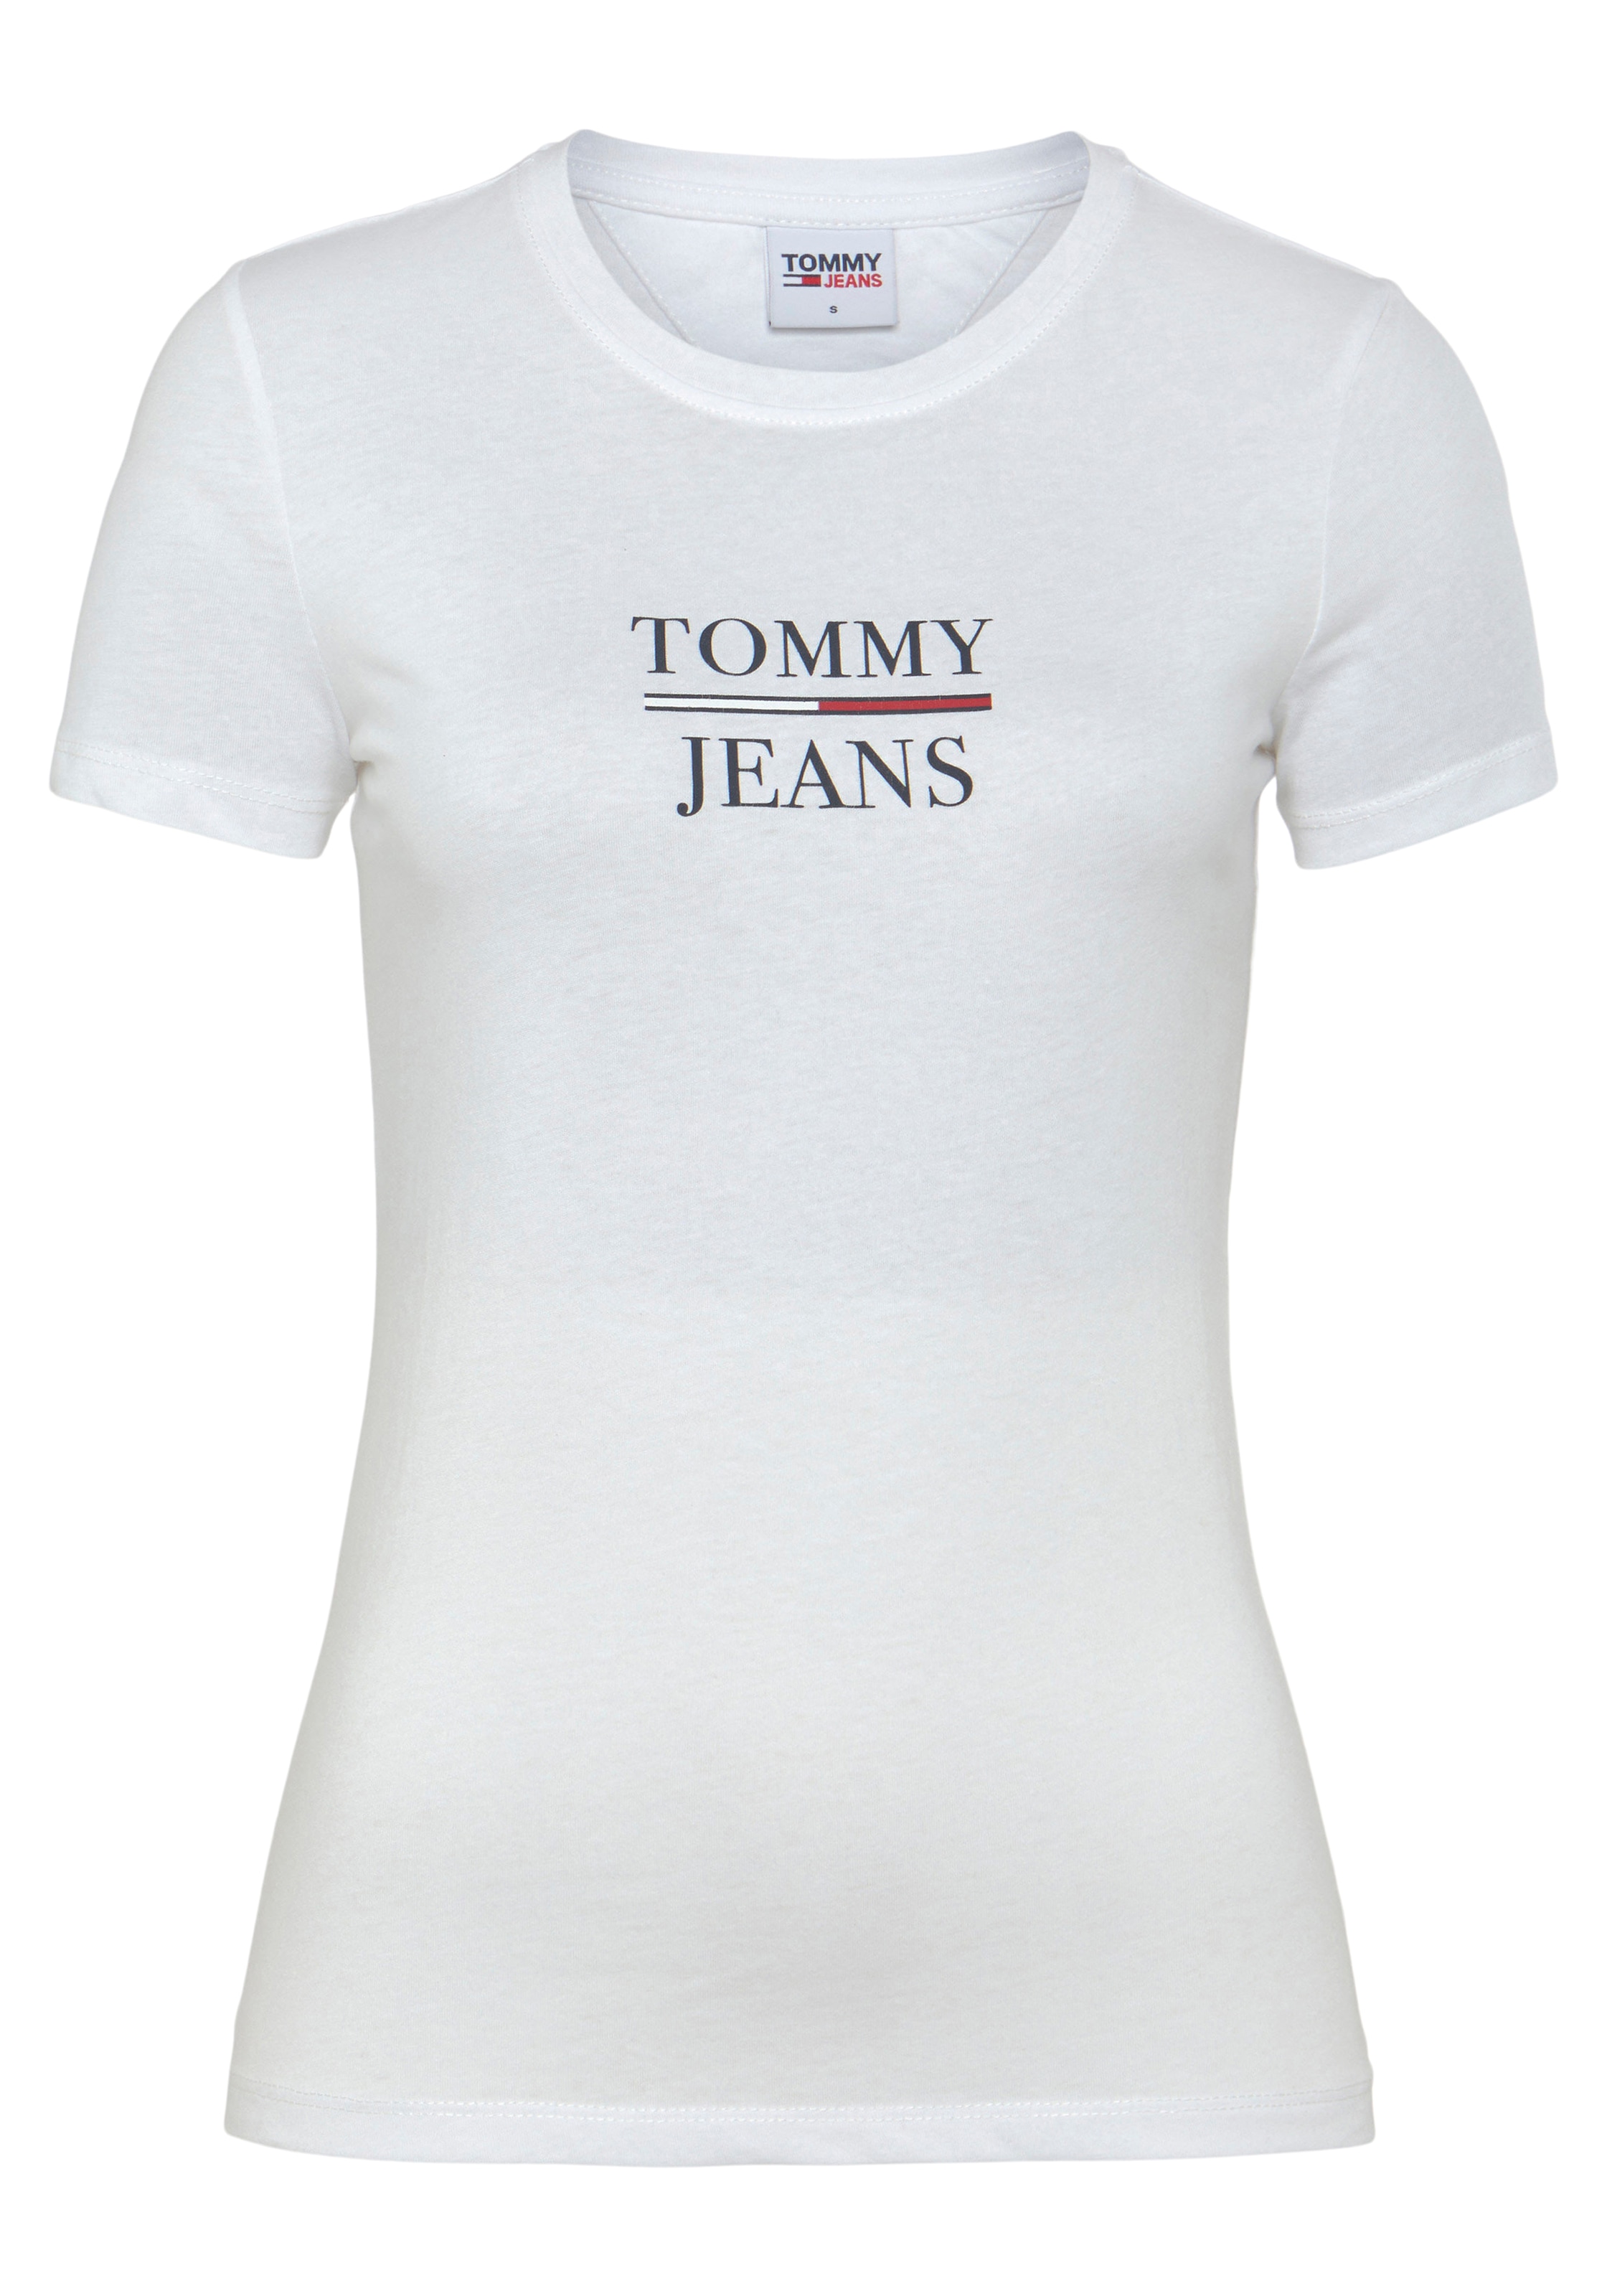 Skinny »TJW T-Shirt ESS TOMMY SS«, bei Jeans (Packung, 2er-Pack) 2PACK T ♕ Tommy